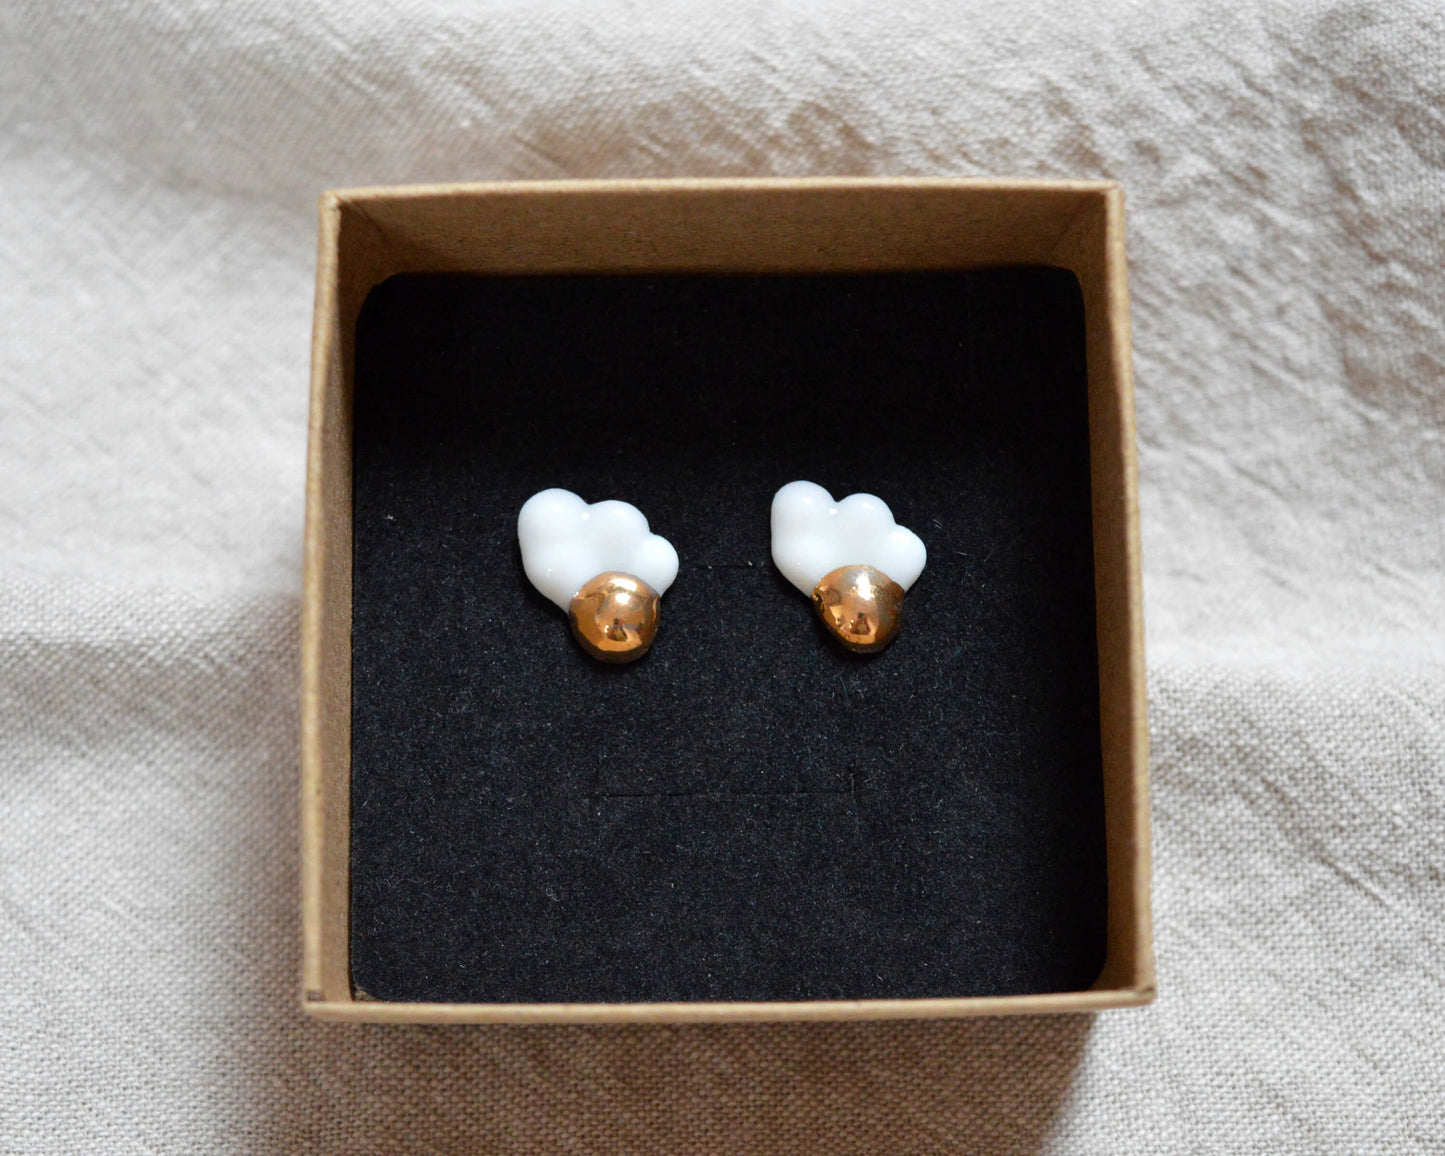 CLOUDS Raggio Mini porcelain earrings with gold or platinum decor